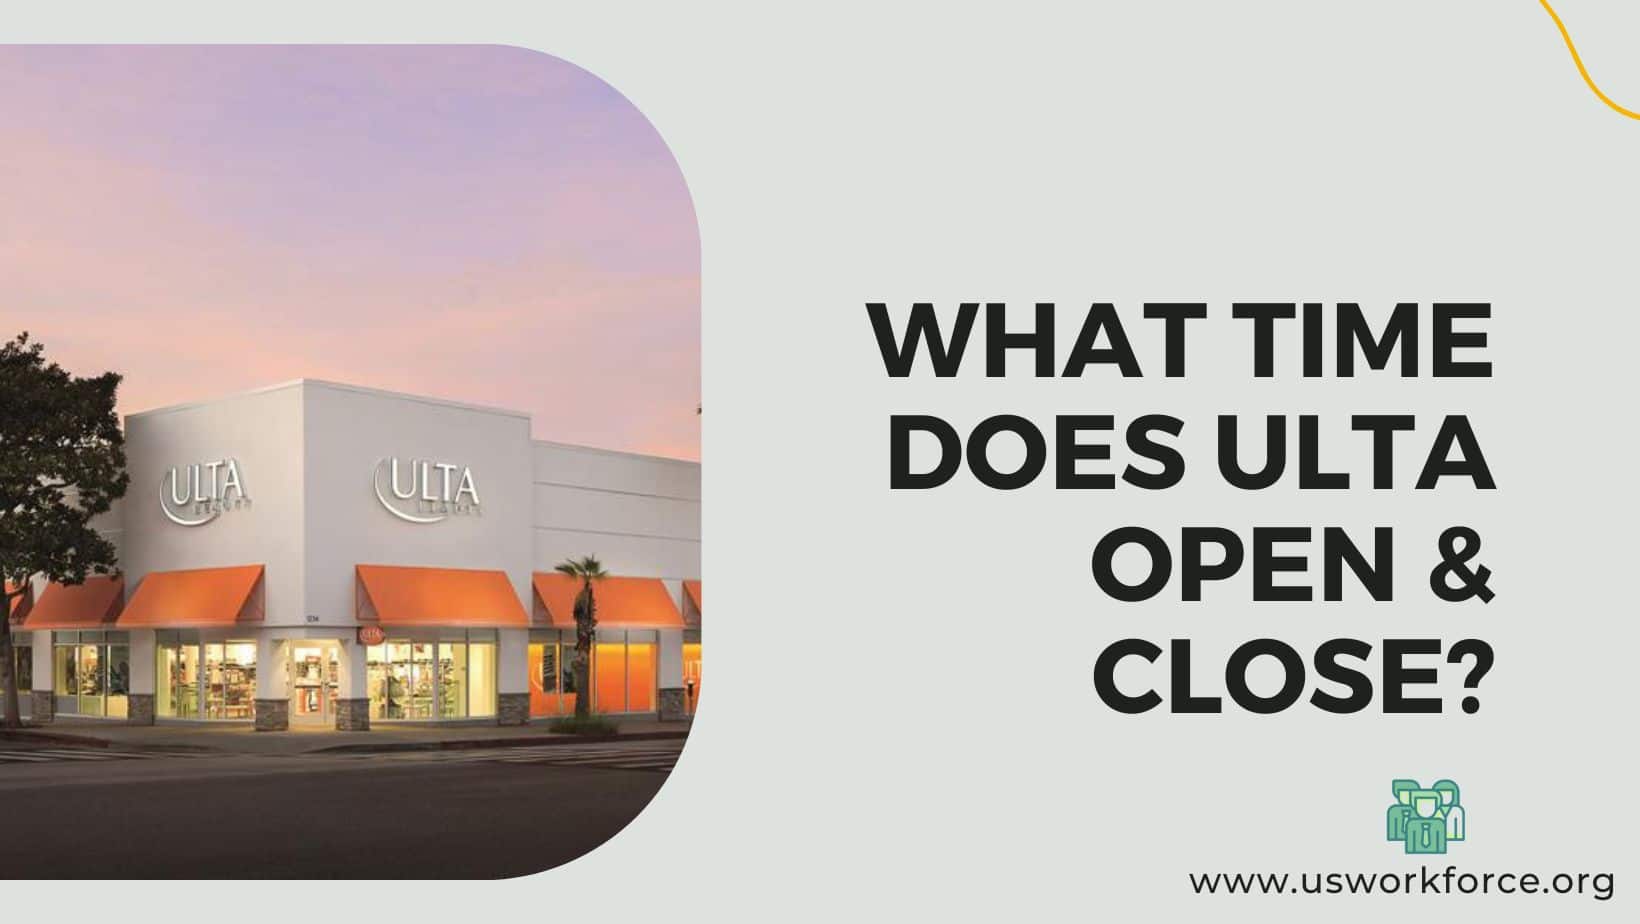 What Time Does Ulta Open & Close? - US Workforce